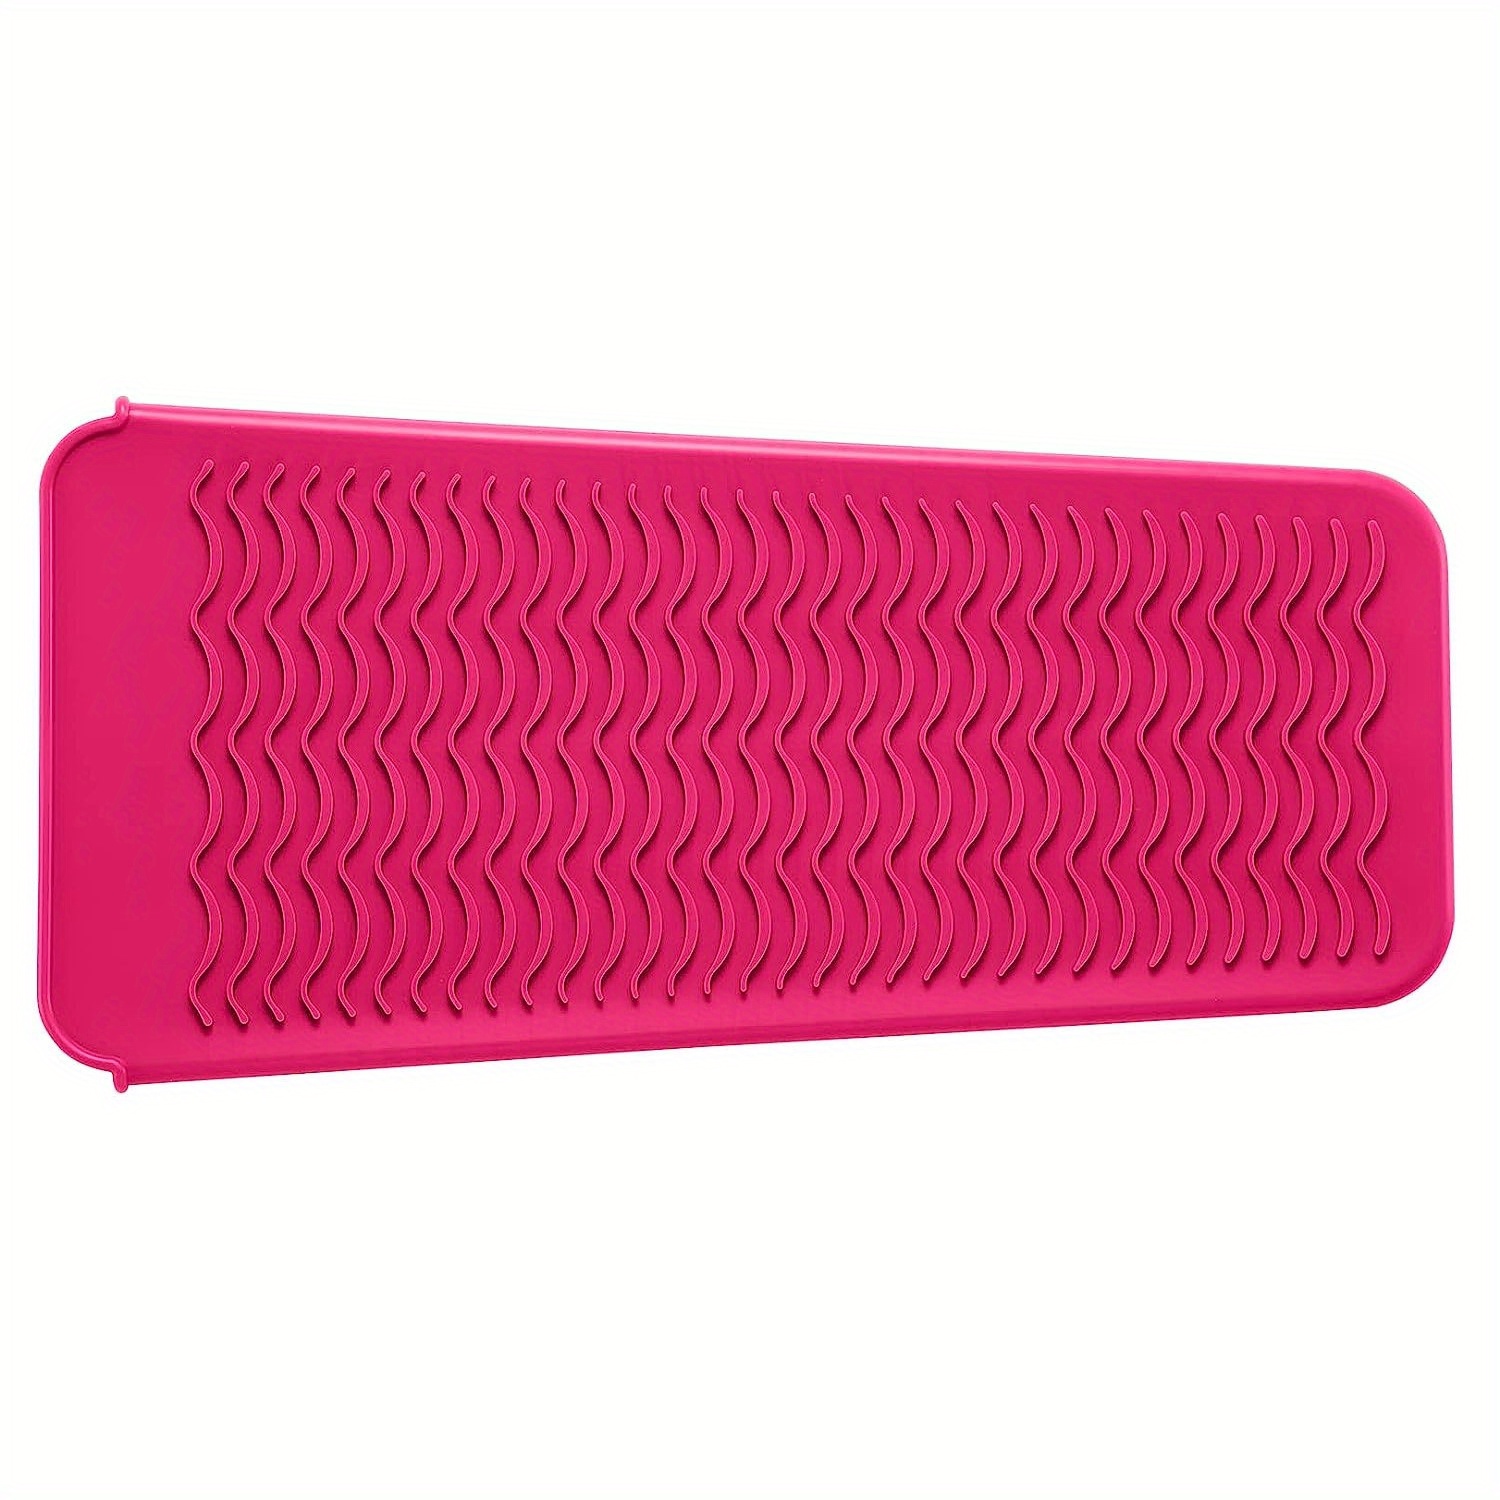 EIOKIT Silicone Heat Resistant Travel Mat Pouch for Hair  Straightener,Crimping Iron,Hair Curling Iron,Hair Curling Wand,Flat  Iron,Hair Waving Iron and